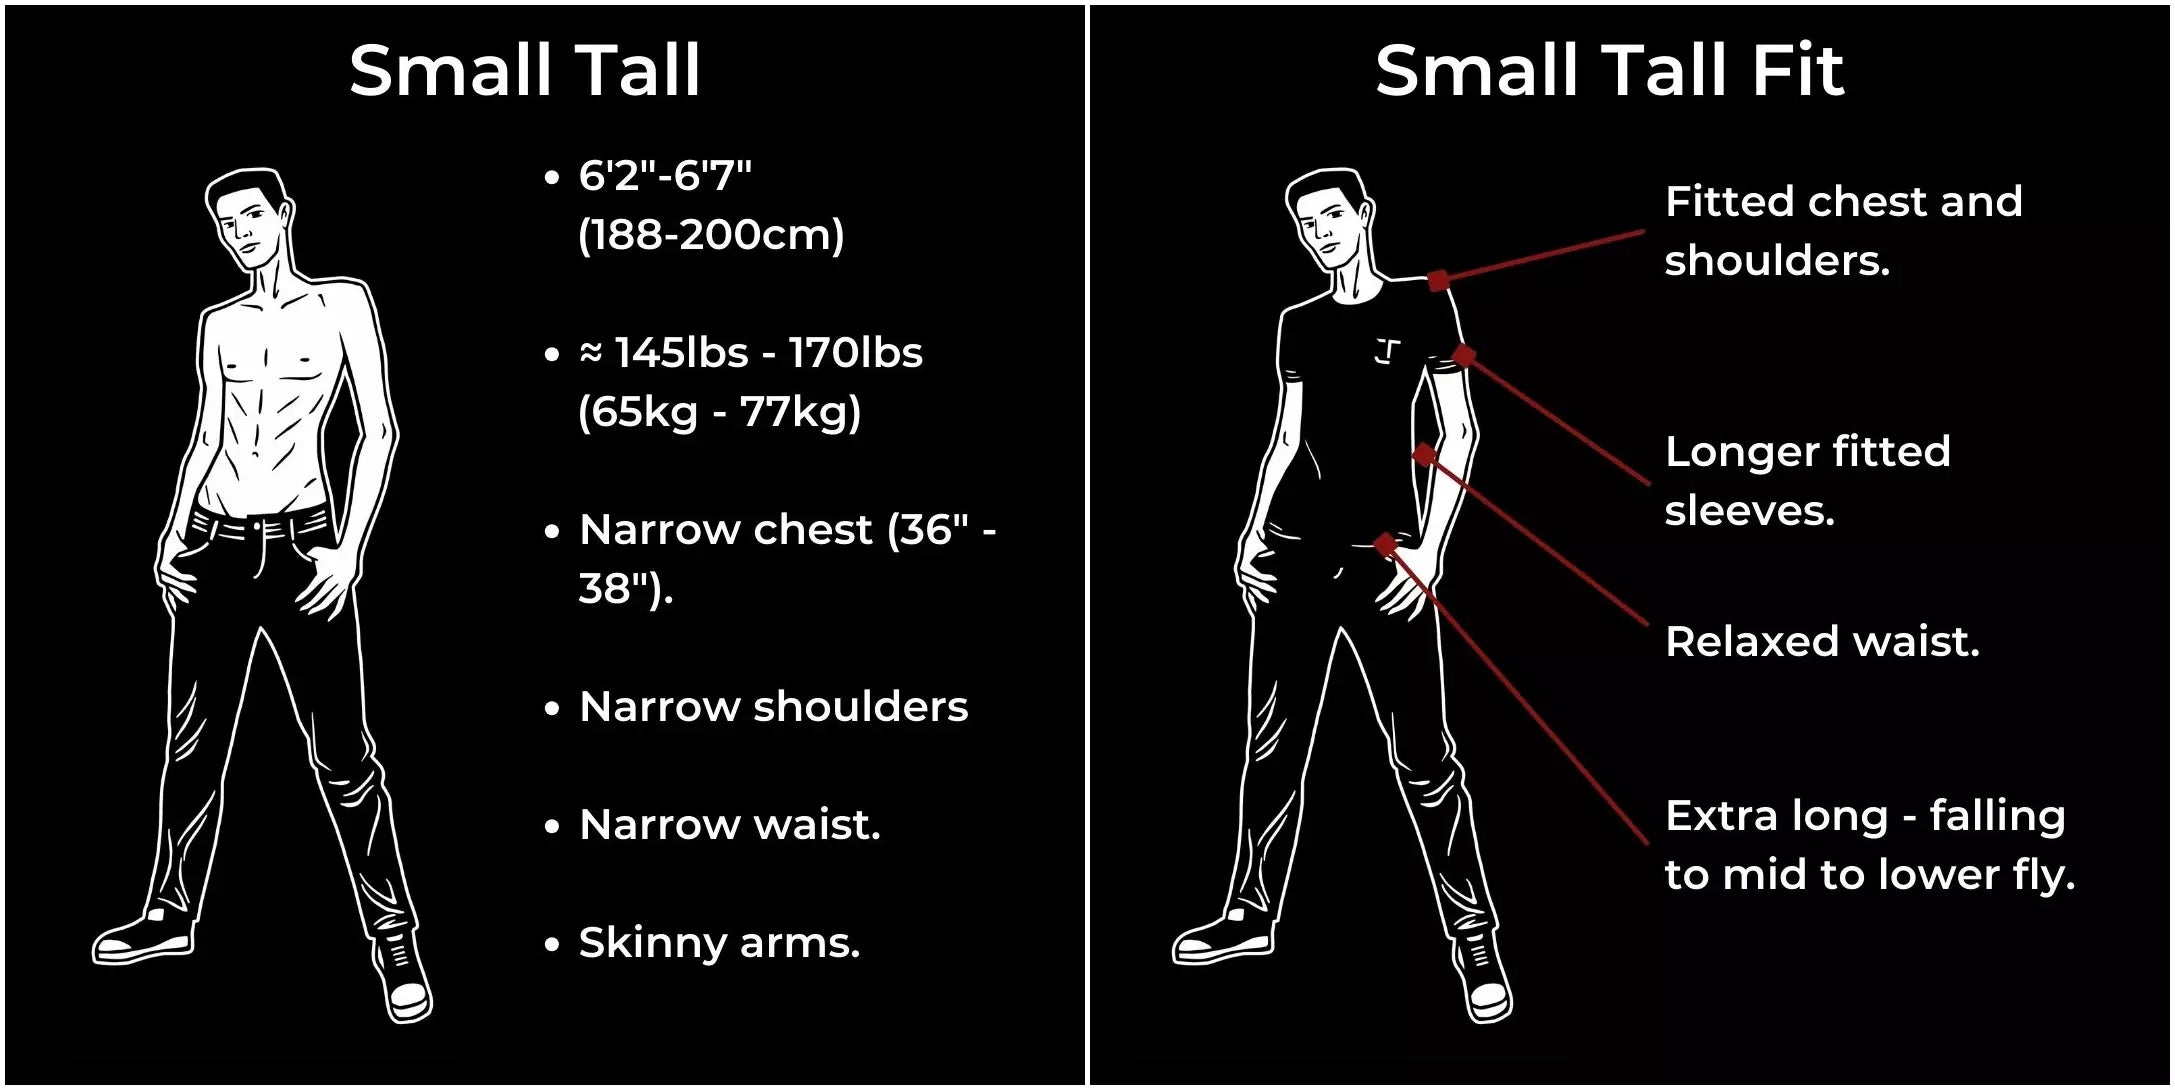 Small tall for tall and skinny guys 145-170lbs and 6'2"-6'7".